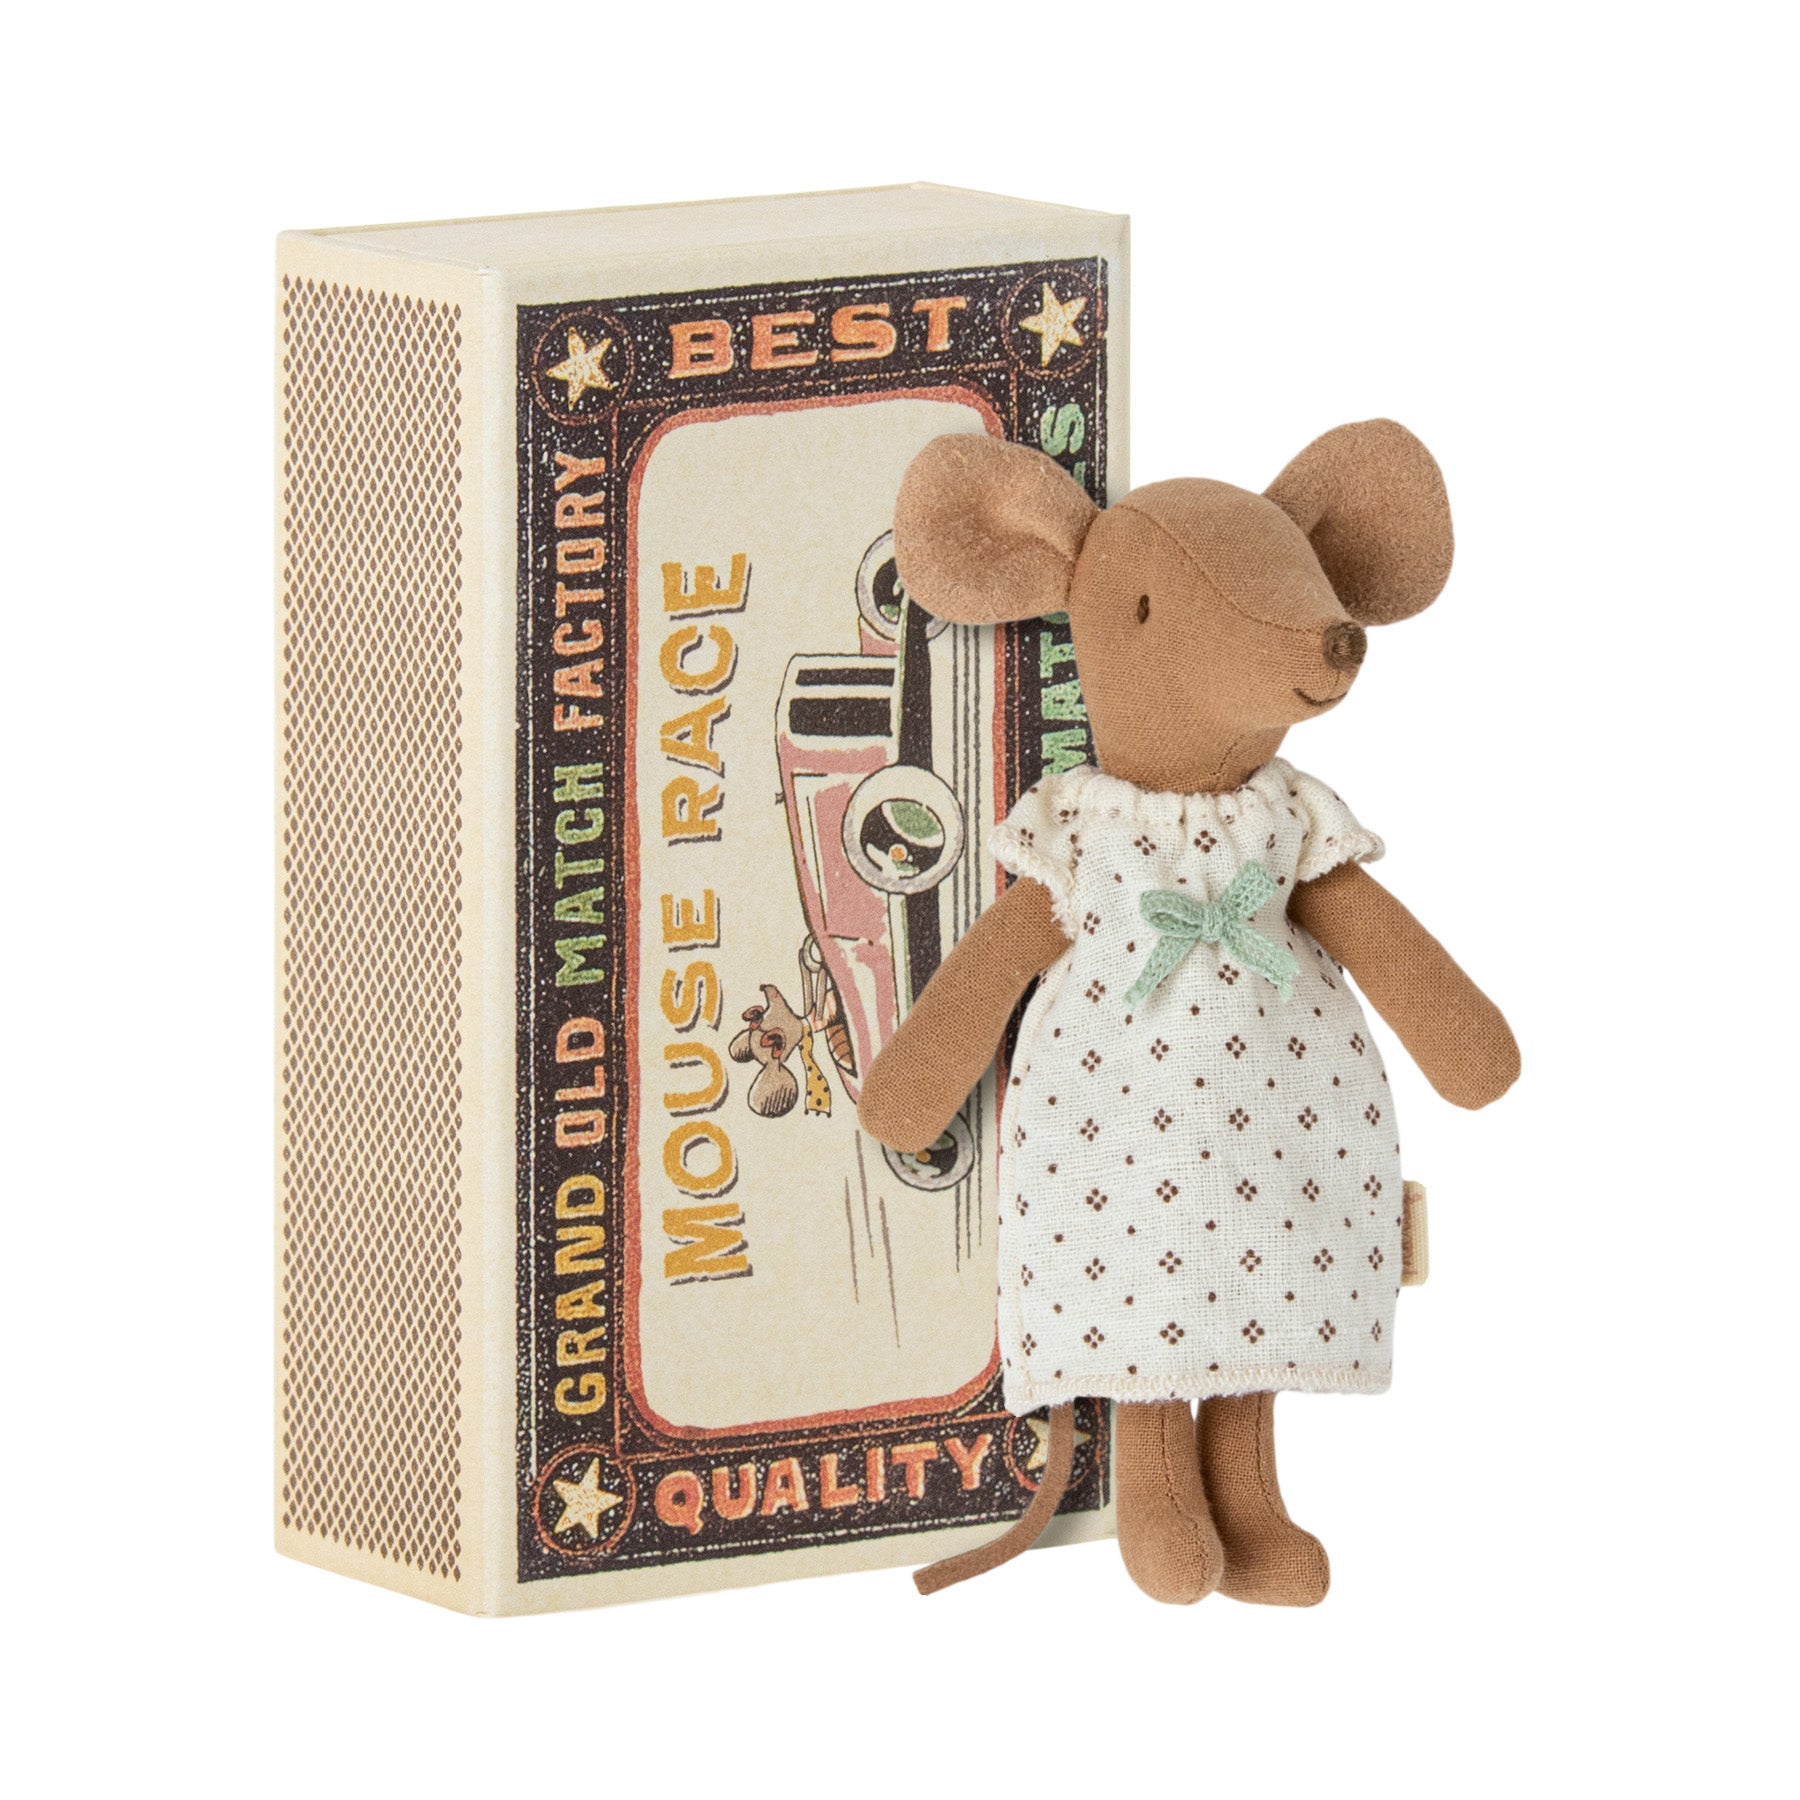 maileg vintage style matchbox with a darker skin tone mouse in a white patterened dress